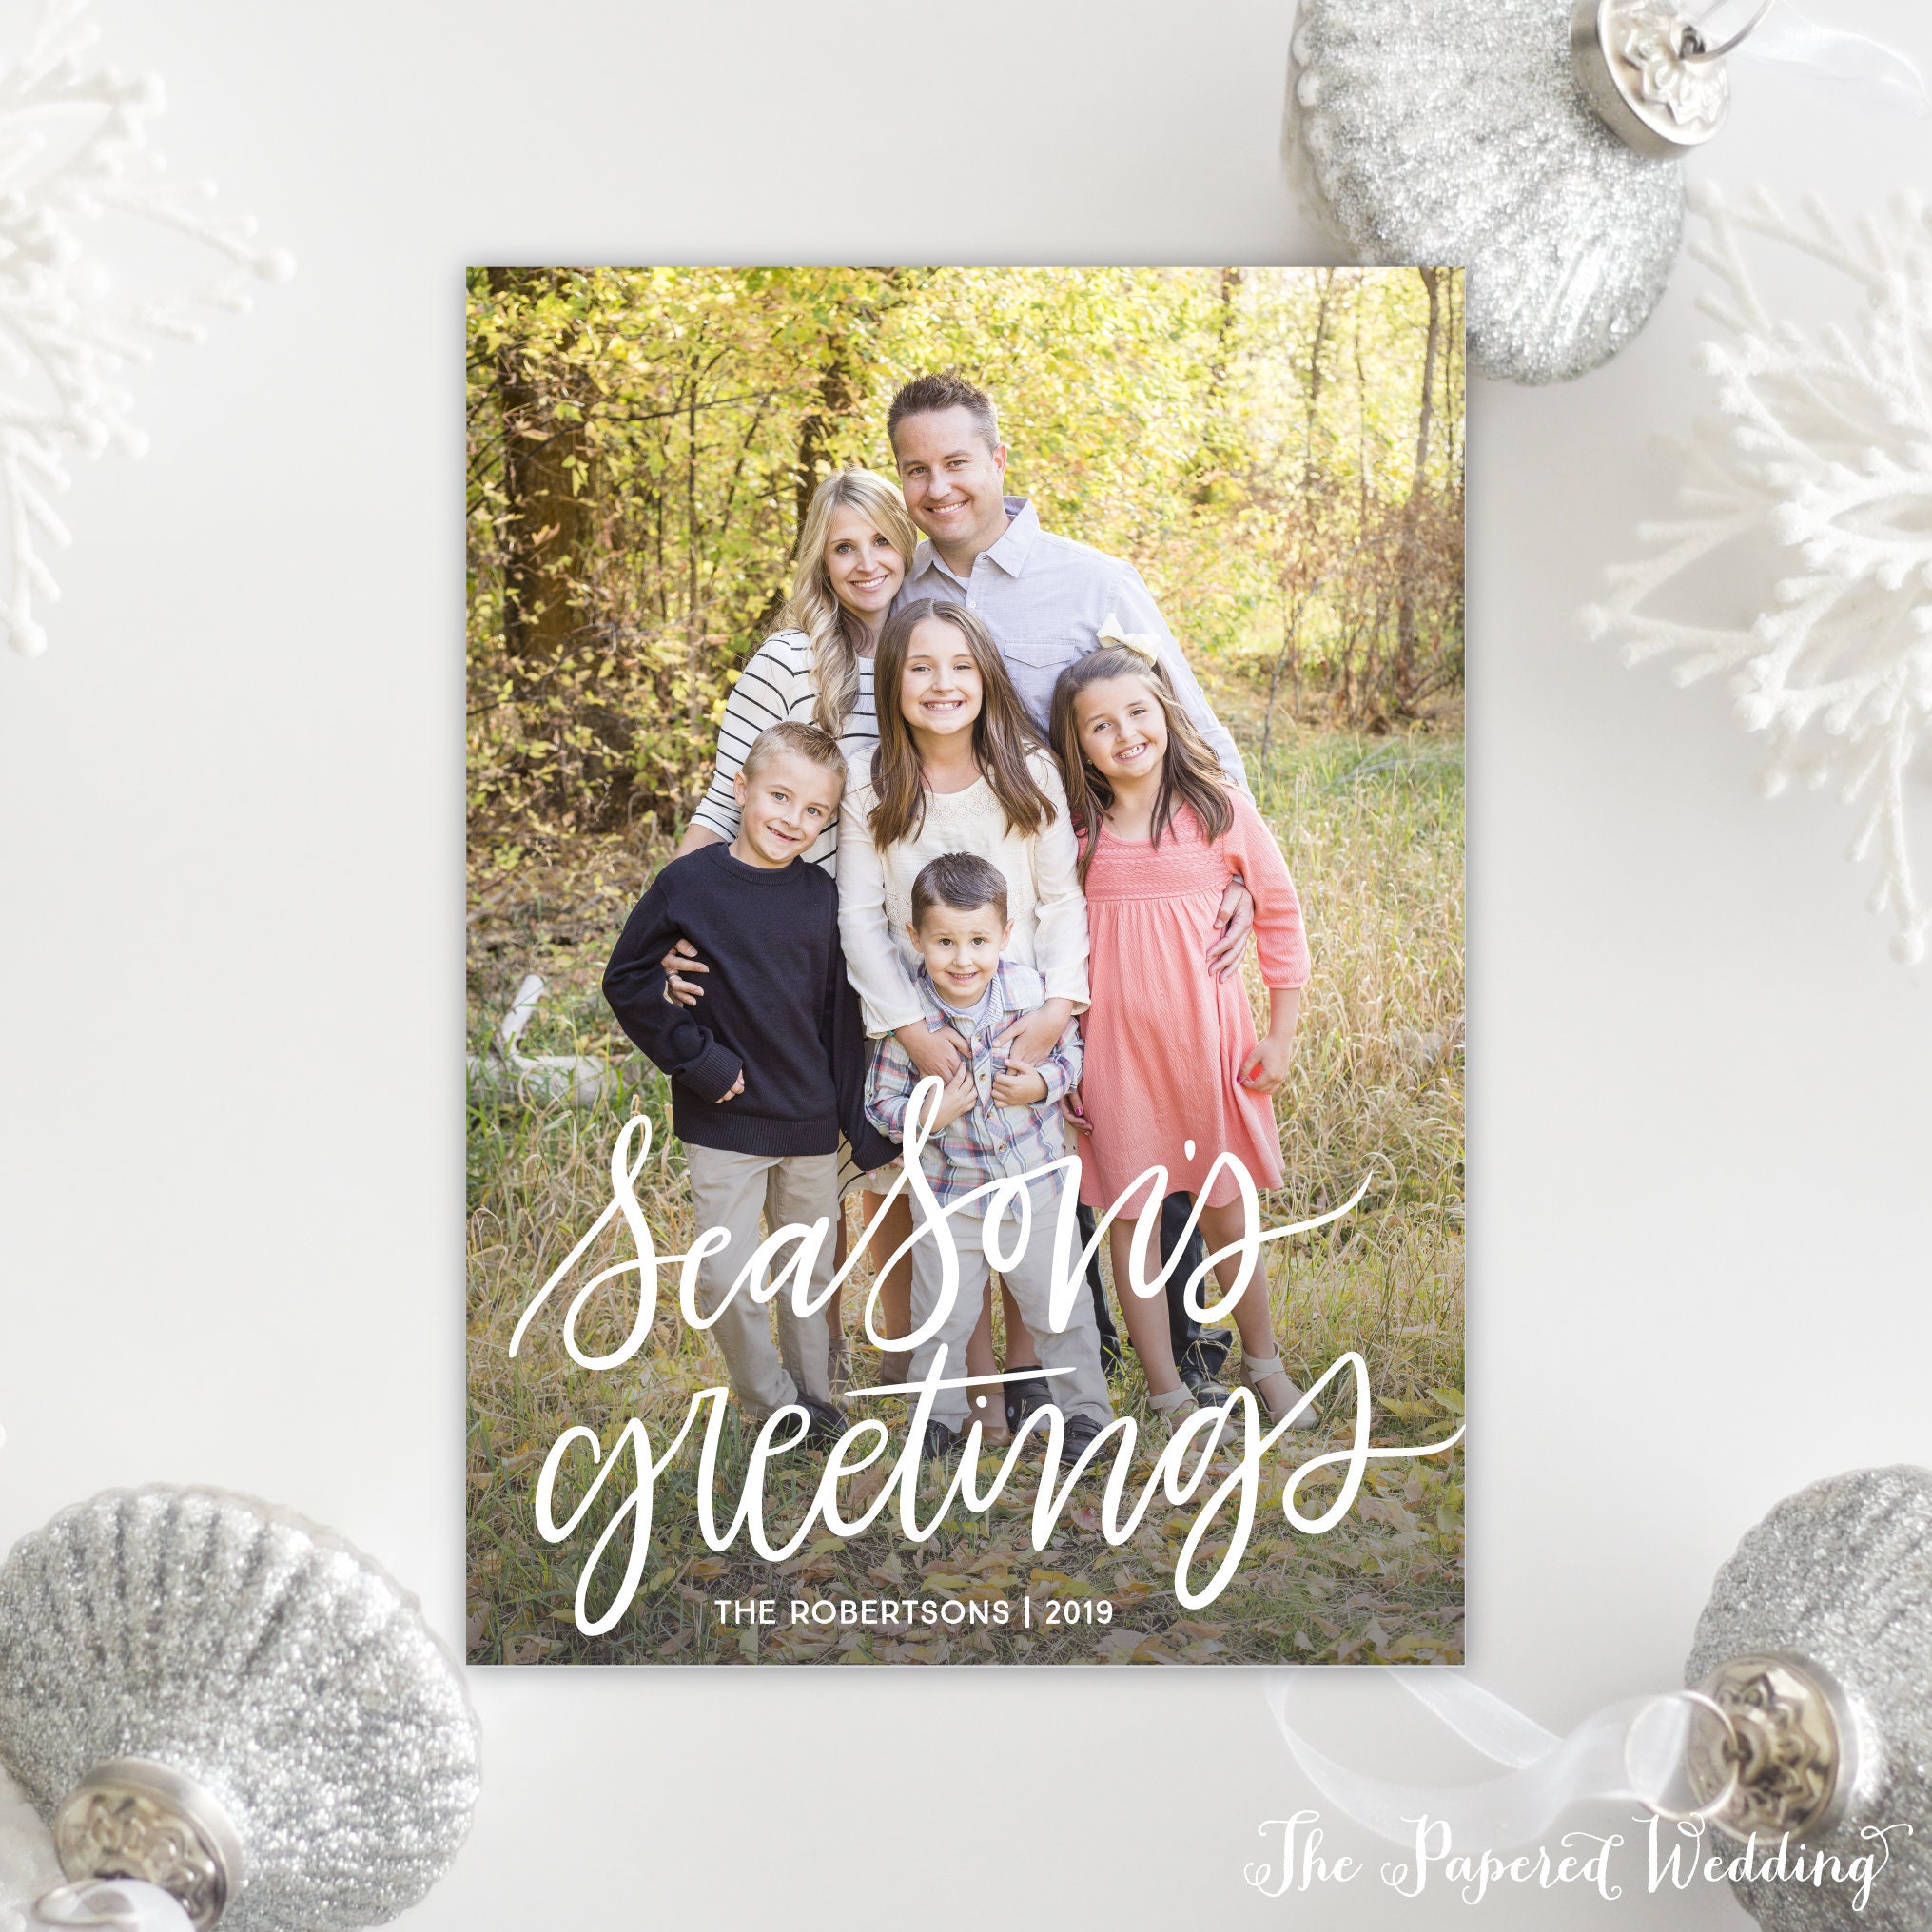 Printable Or Printed Season's Greetings Christmas Cards - Picture Holiday With Hand-Lettered Wording 103 P1